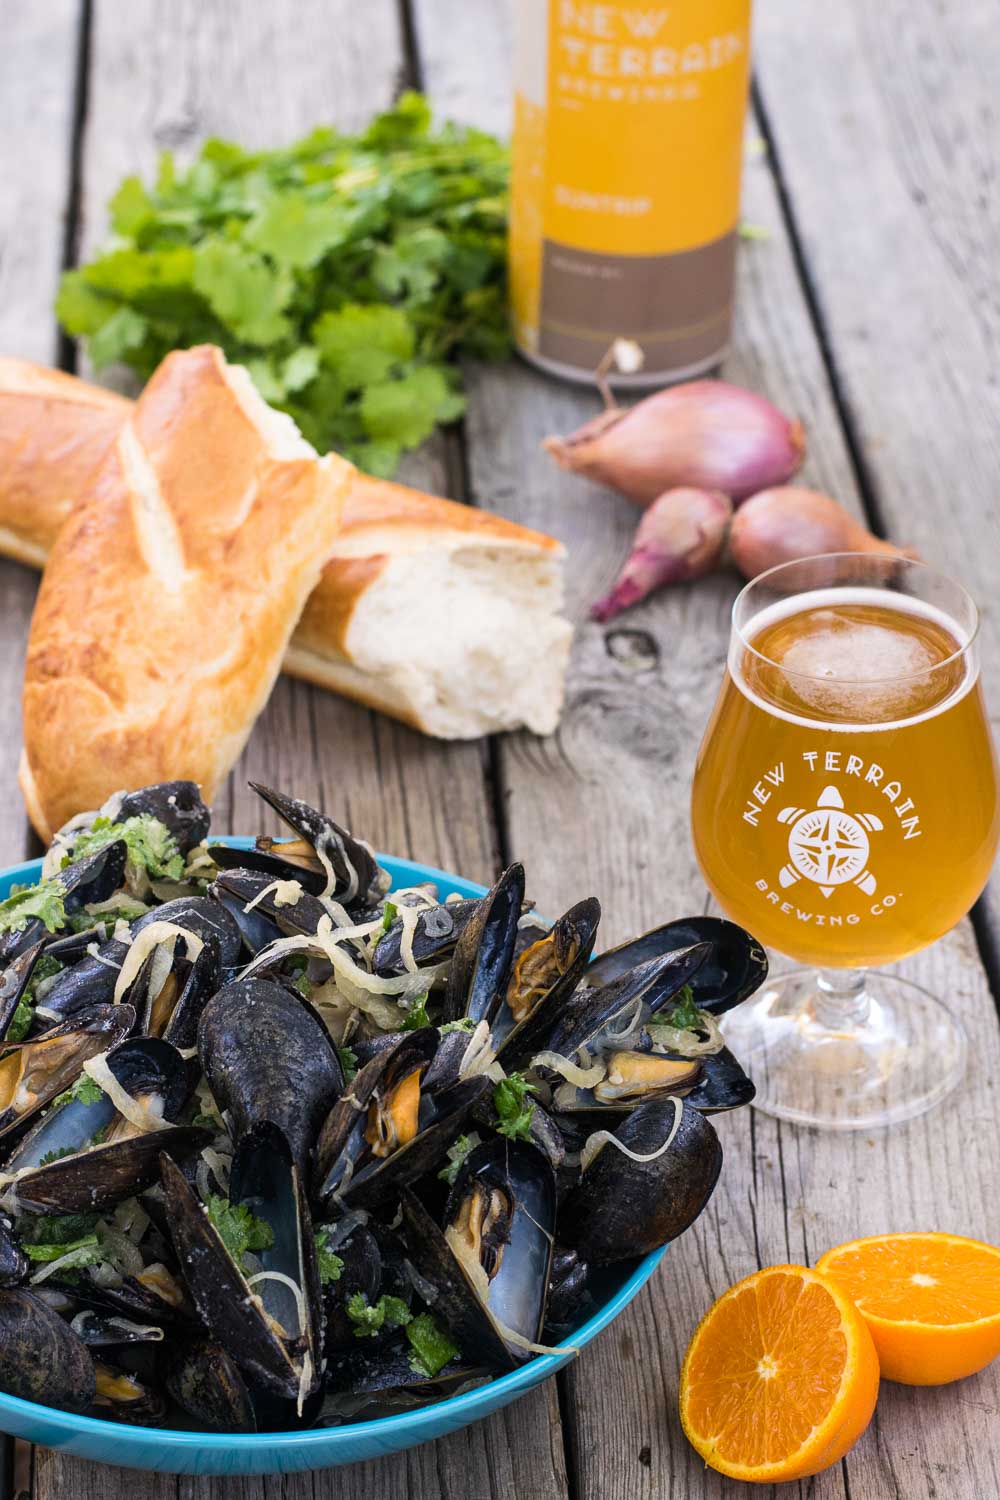 Celebrating Great American Beer Festival with craft beer recipes from Golden, Colorado! New Terrain's Suntrip makes the perfect broth for mussels, fennel, & shallots.